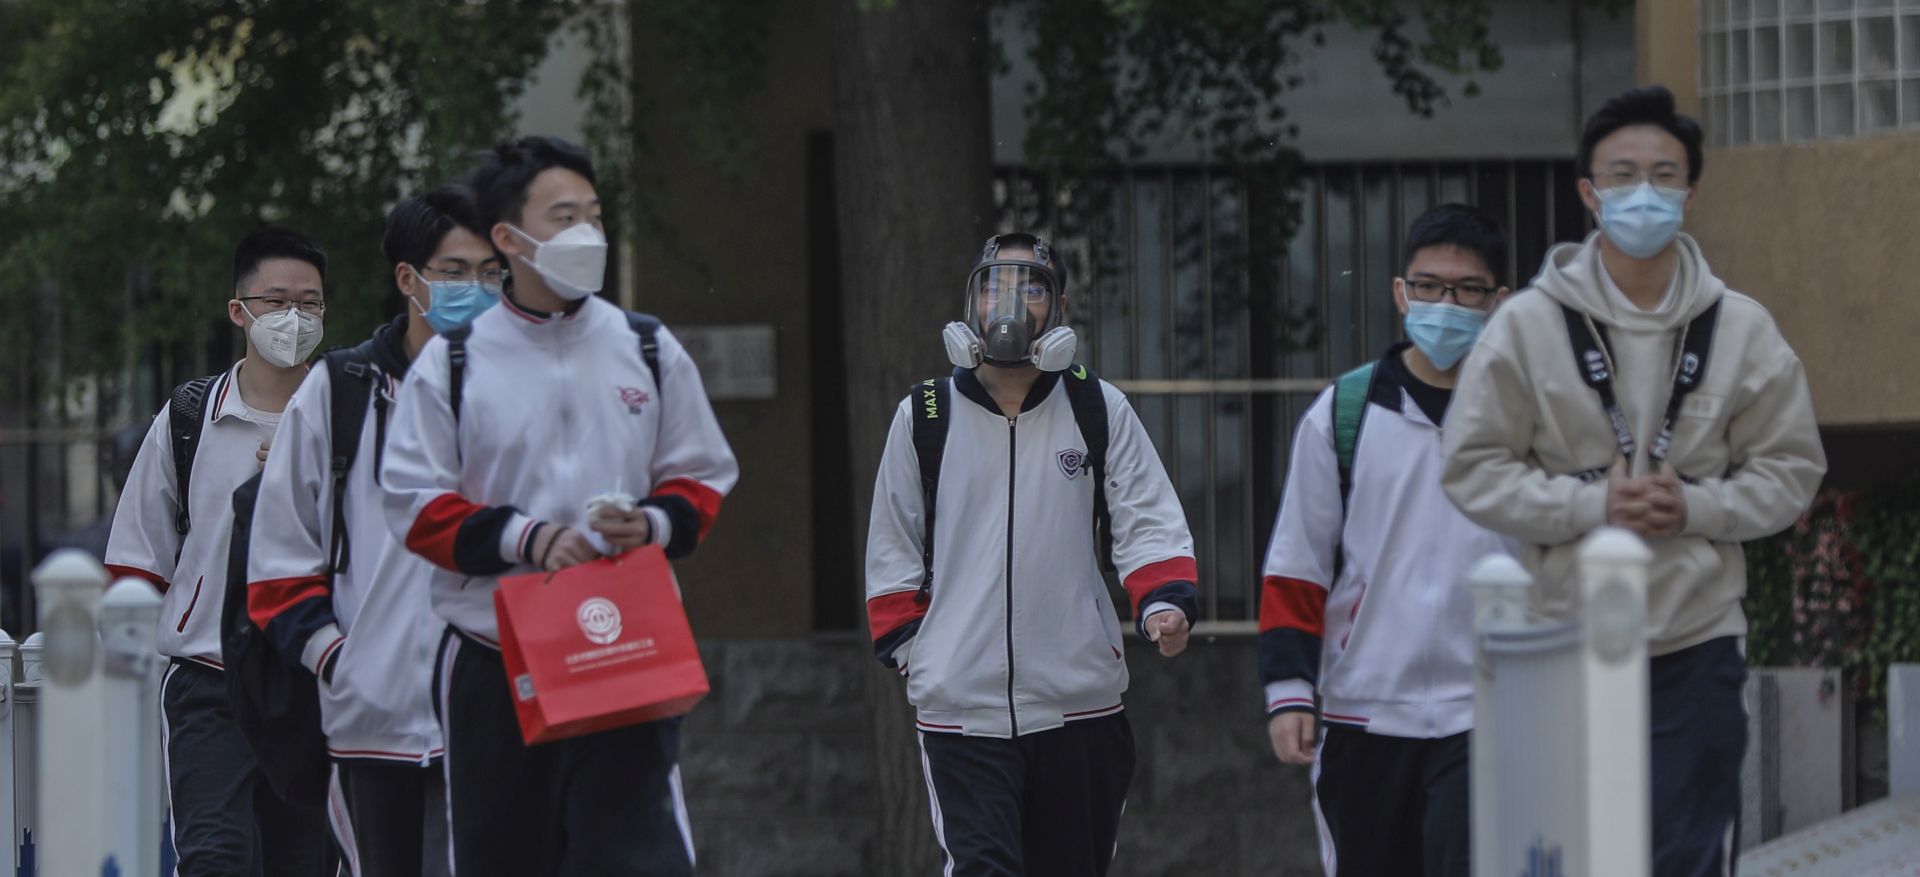 epa08386077 Students wearing face masks leave a high school in Beijing, China, 27 April 2020. Senior students in Beijing return to class for the first time after schools were closed down in January due to the outbreak of the coronavirus and COVID-19 disease.  EPA/WU HONG